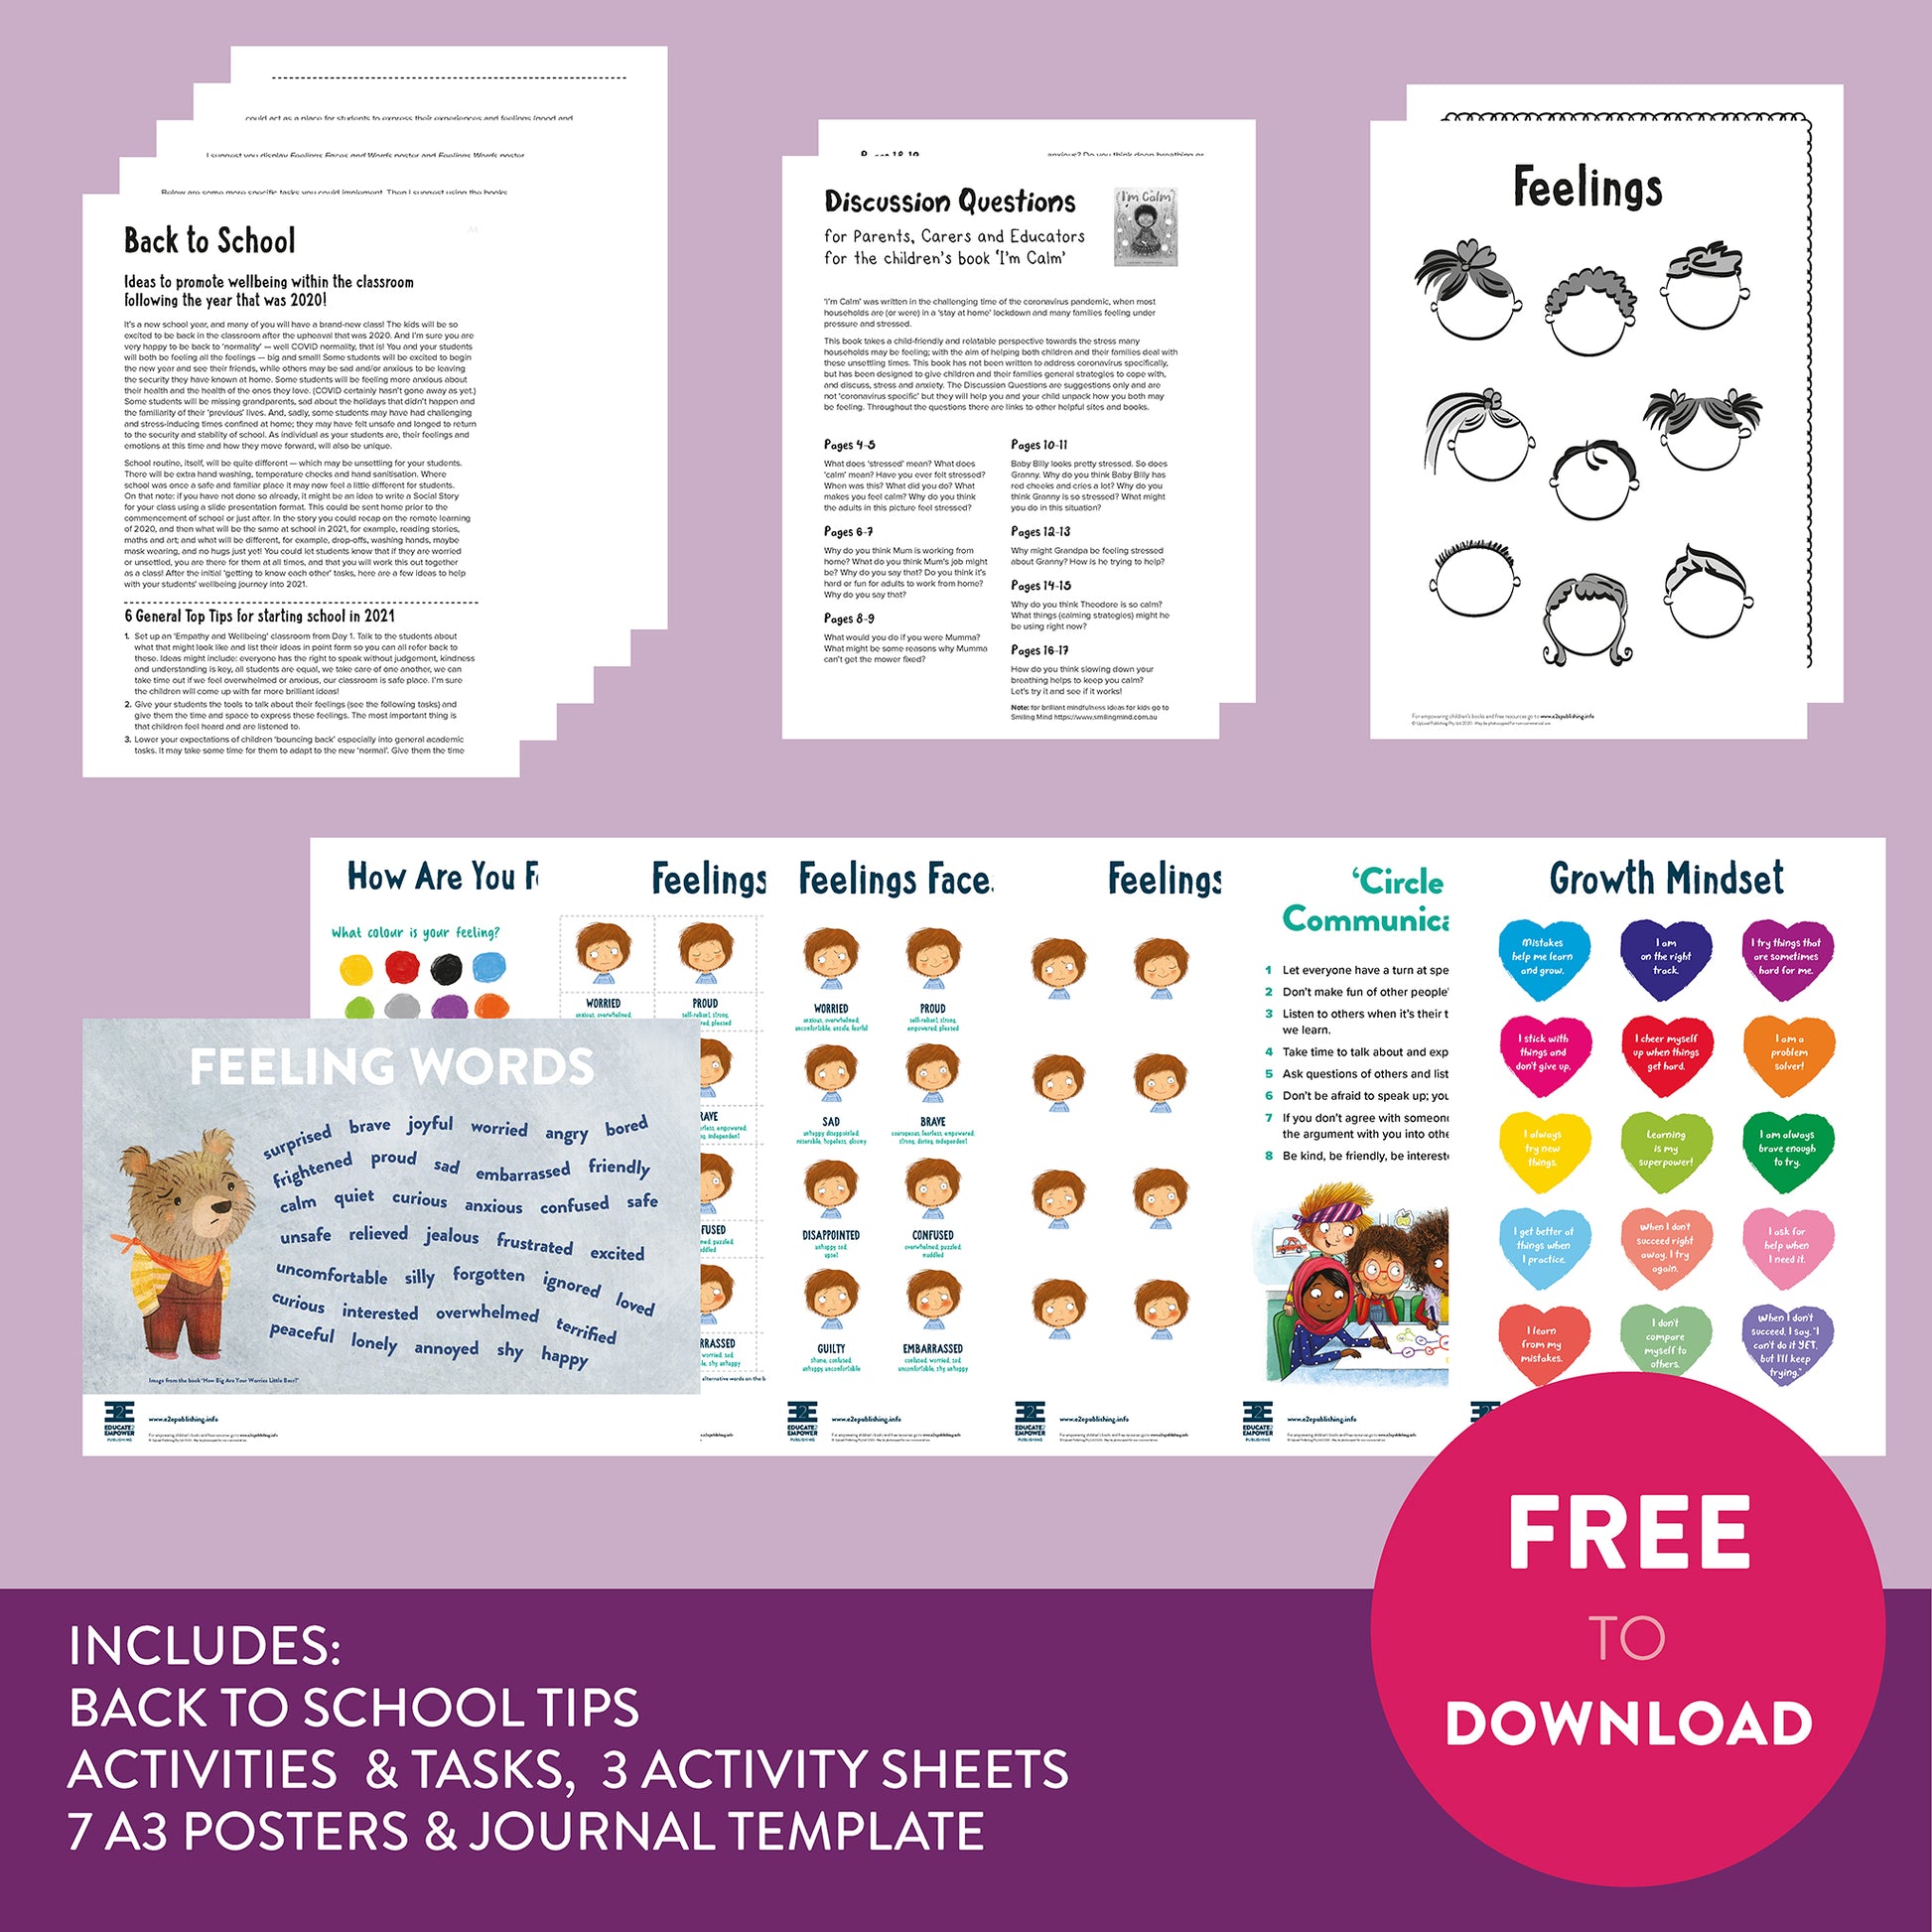 A promotional image showing the activity sheets and lesson plans included in the free 'Back to School' Bundle.